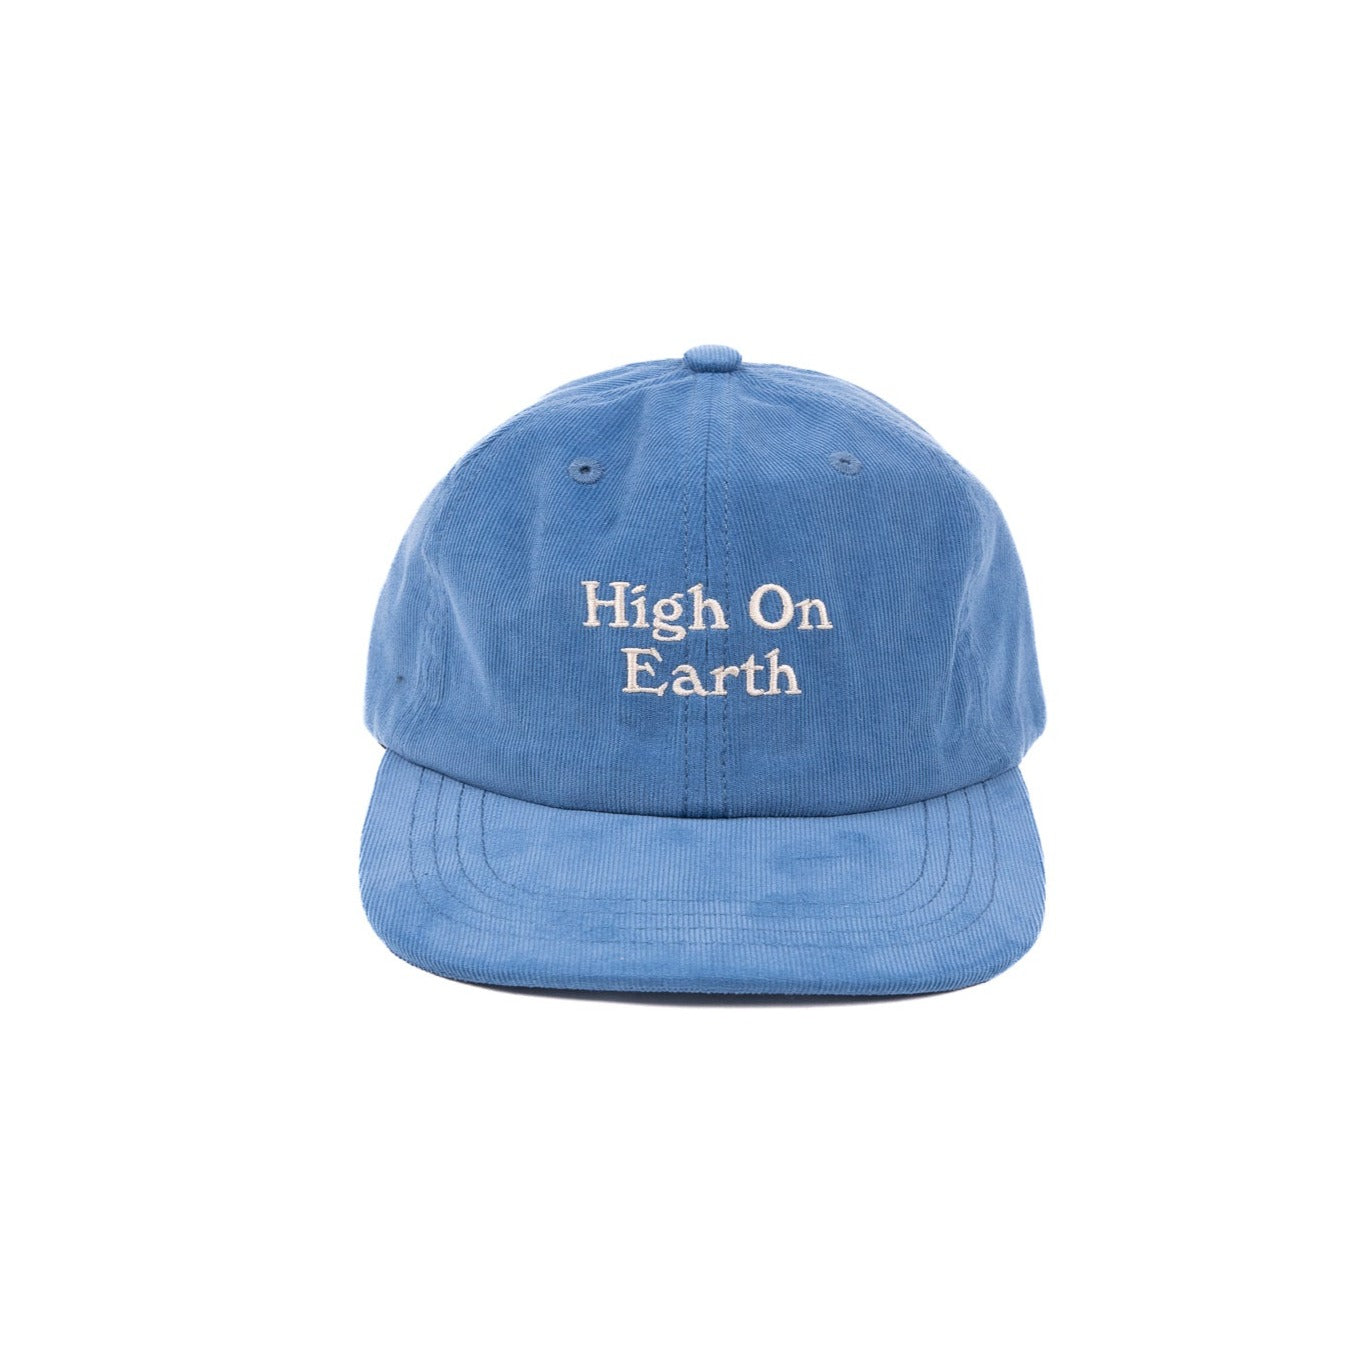 Blue corduroy hat that says "High On Earth" in white font